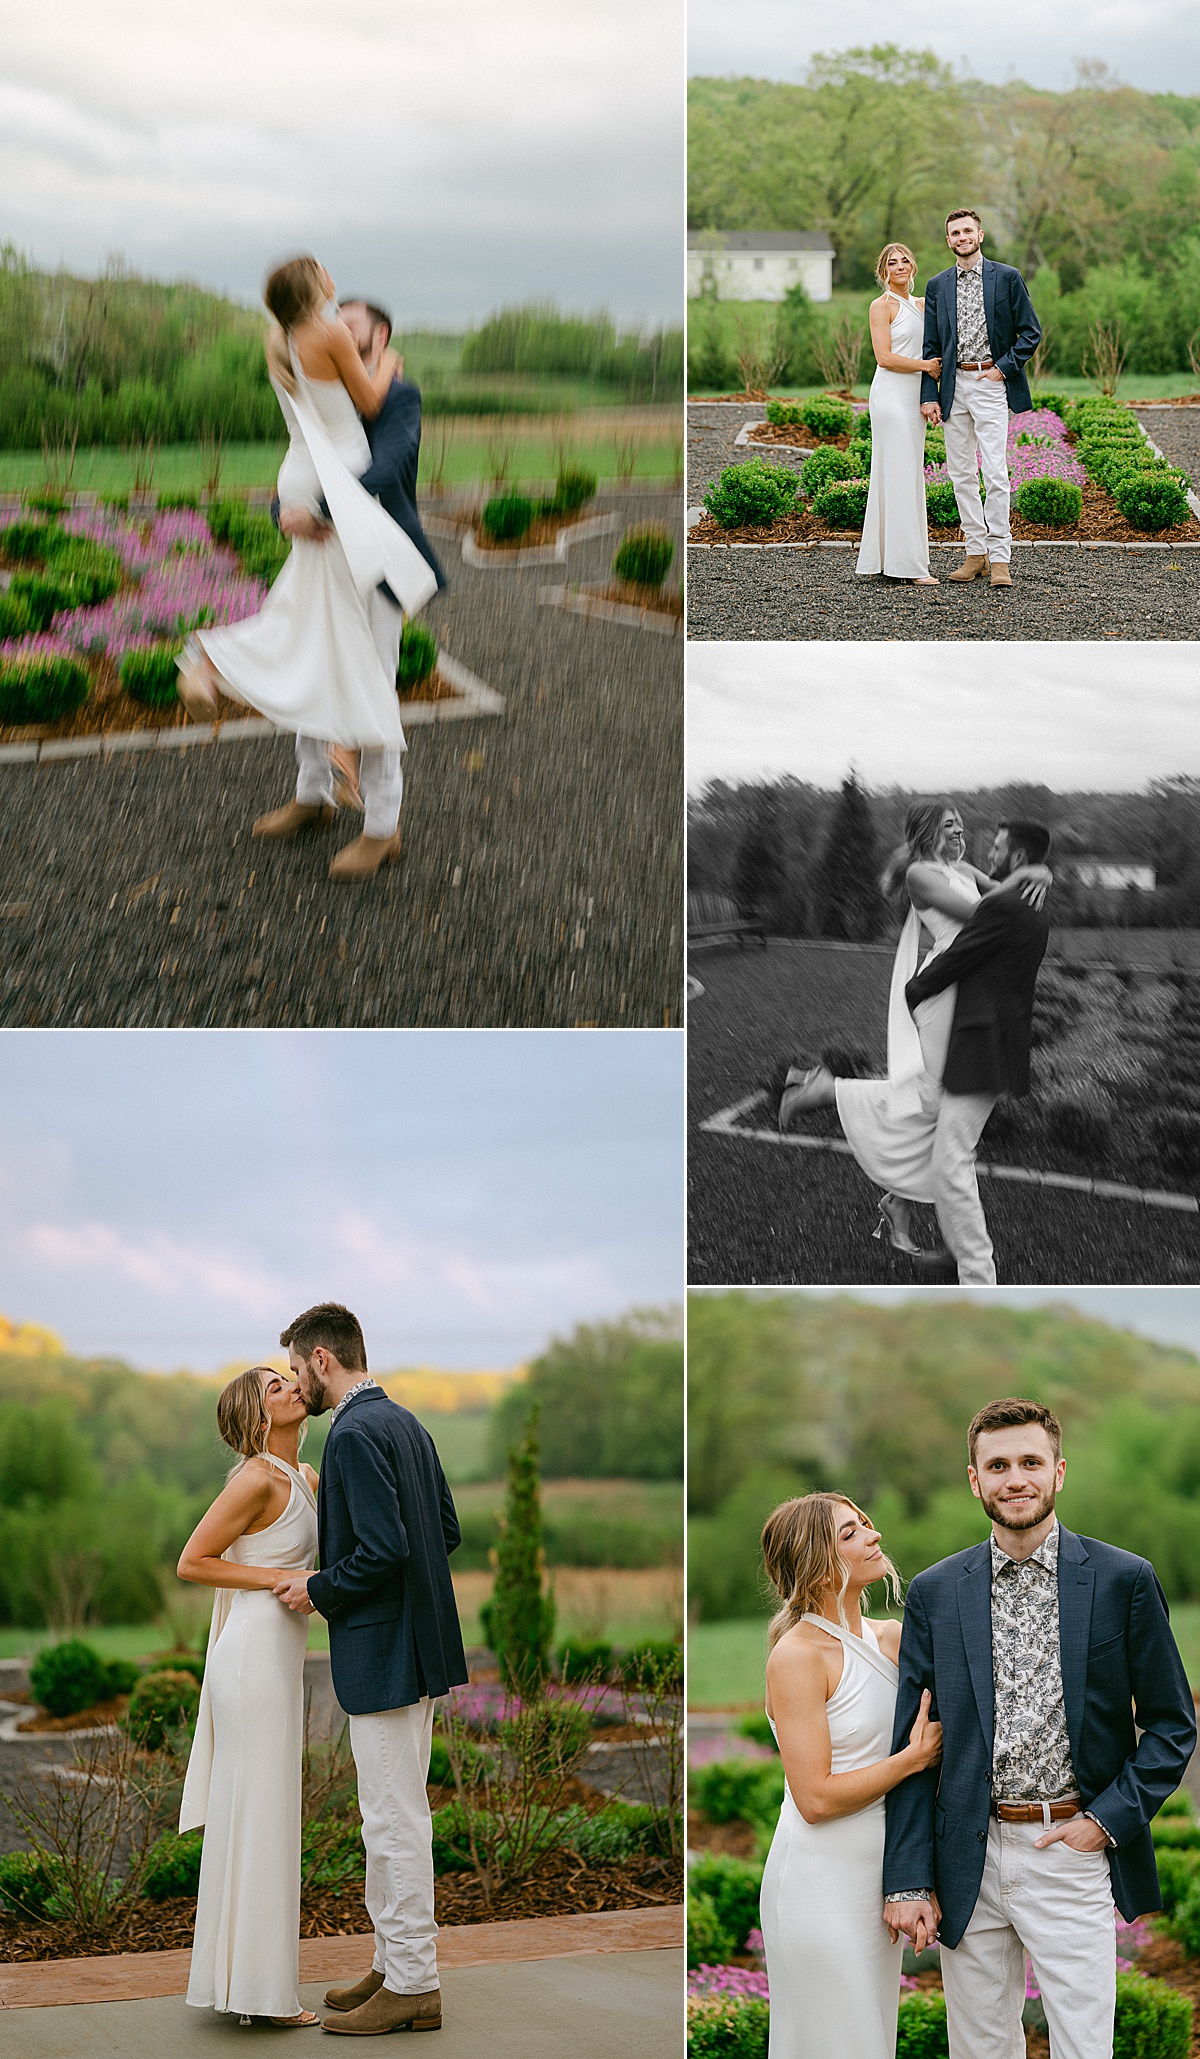 Bride and groom rehearsal dinner party portraits.